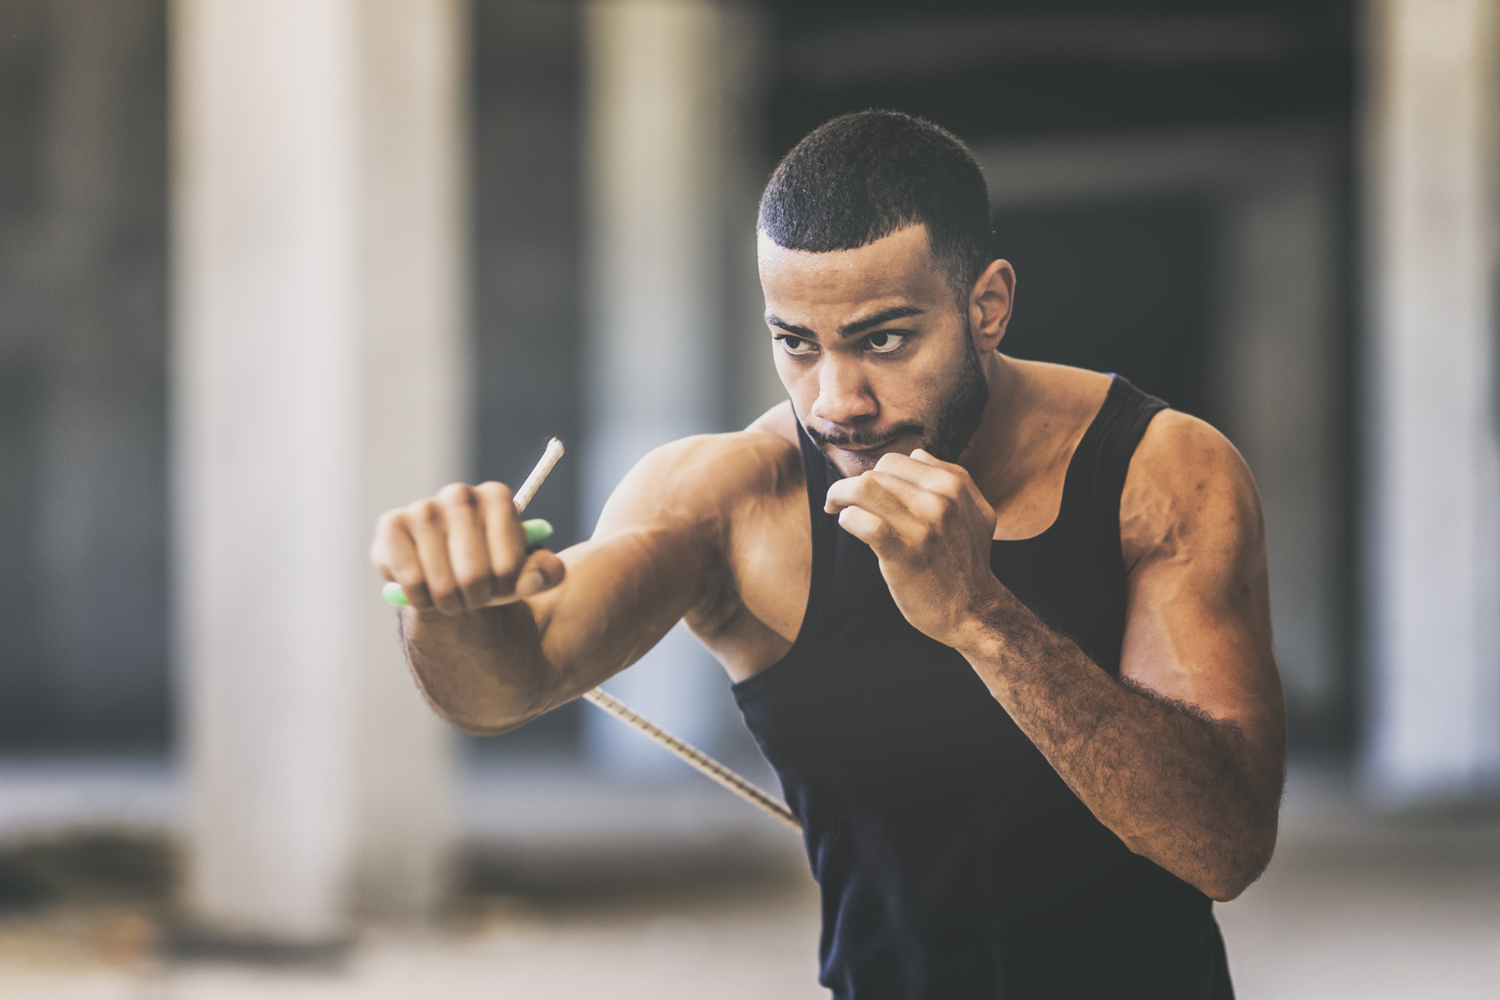 The best boxing workout to help you train like a fighter - The Manual